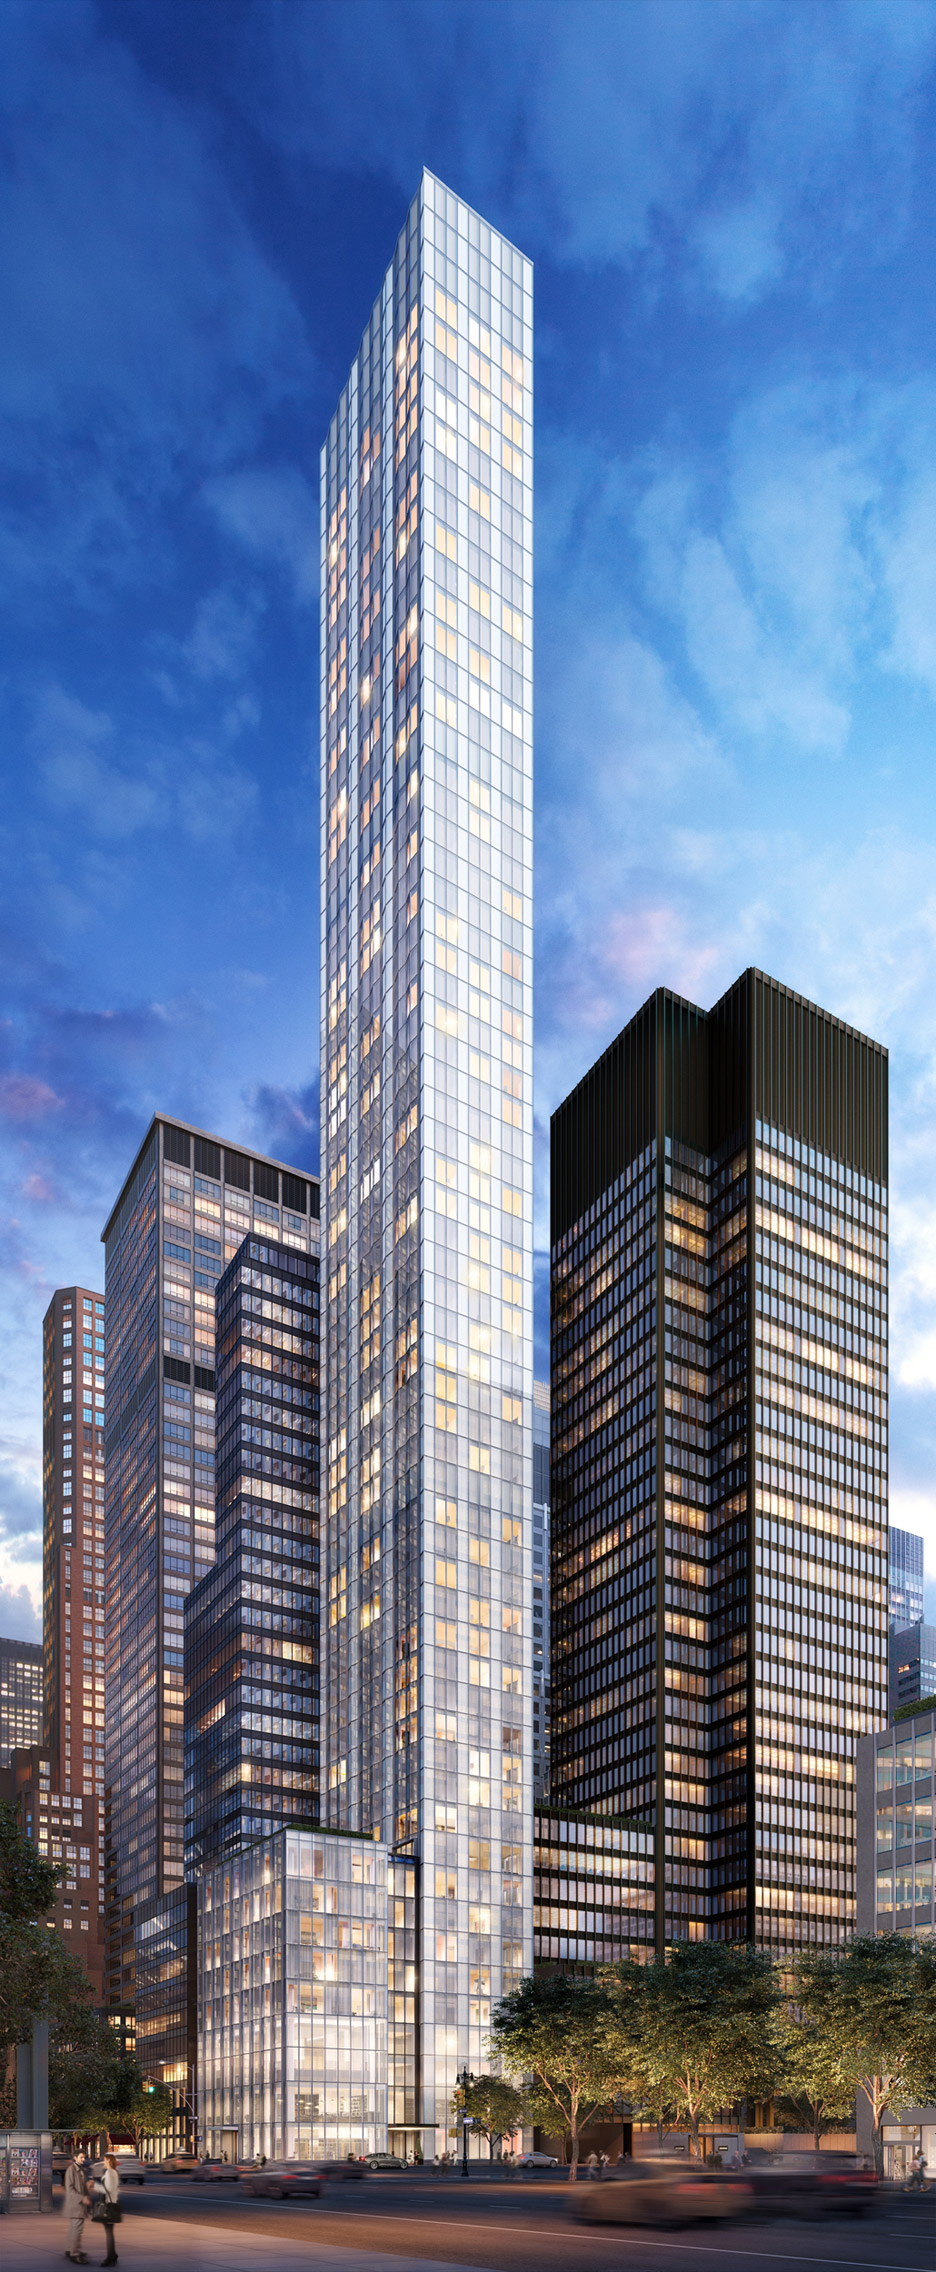 New Images Released Of Foster’s Super-skinny New York Skyscraper